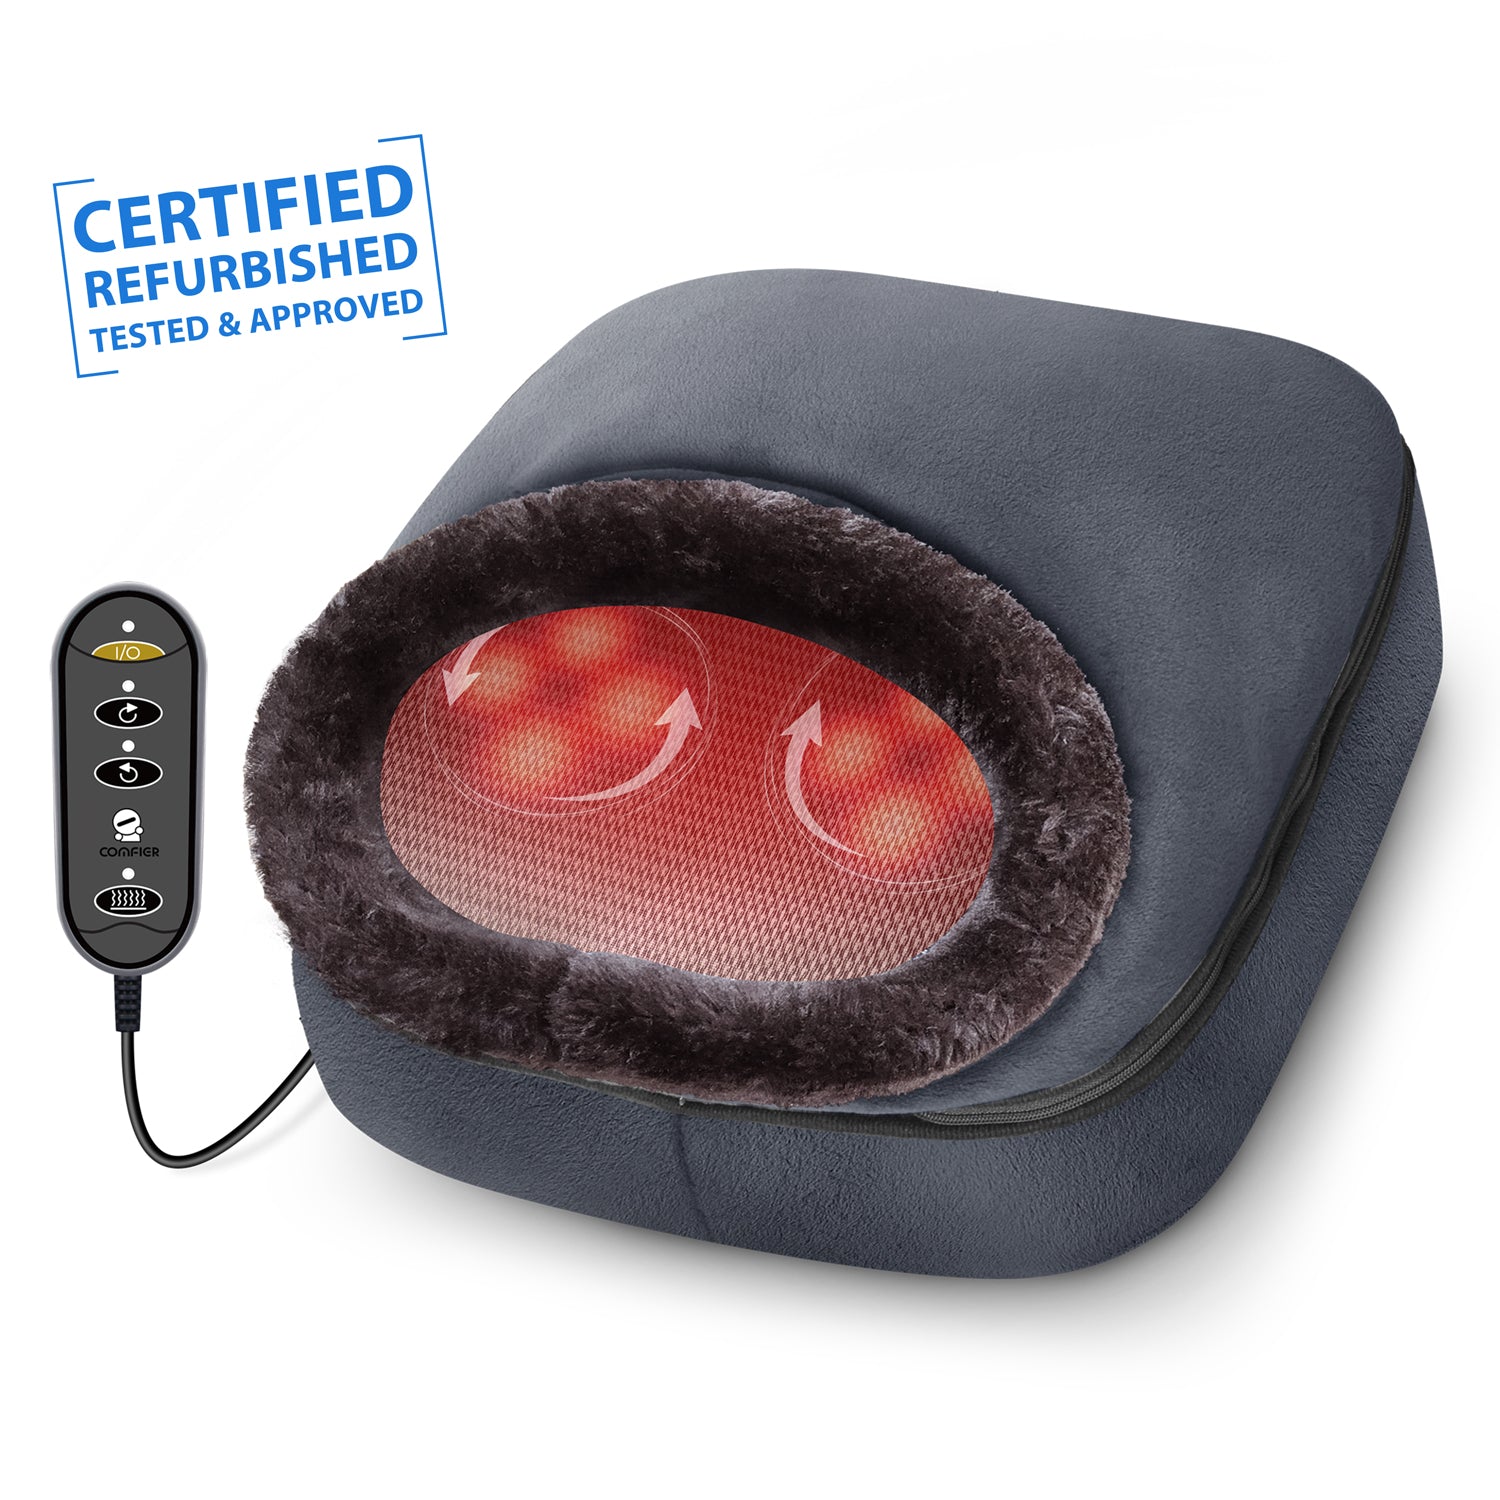 Certified Refurbished - Comfier Shiatsu Foot Massager with Heat,Electric Heated Foot Warmer for Plantar Fasciitis,Neuropathy,Foot Stress Relief - 5202S-USED